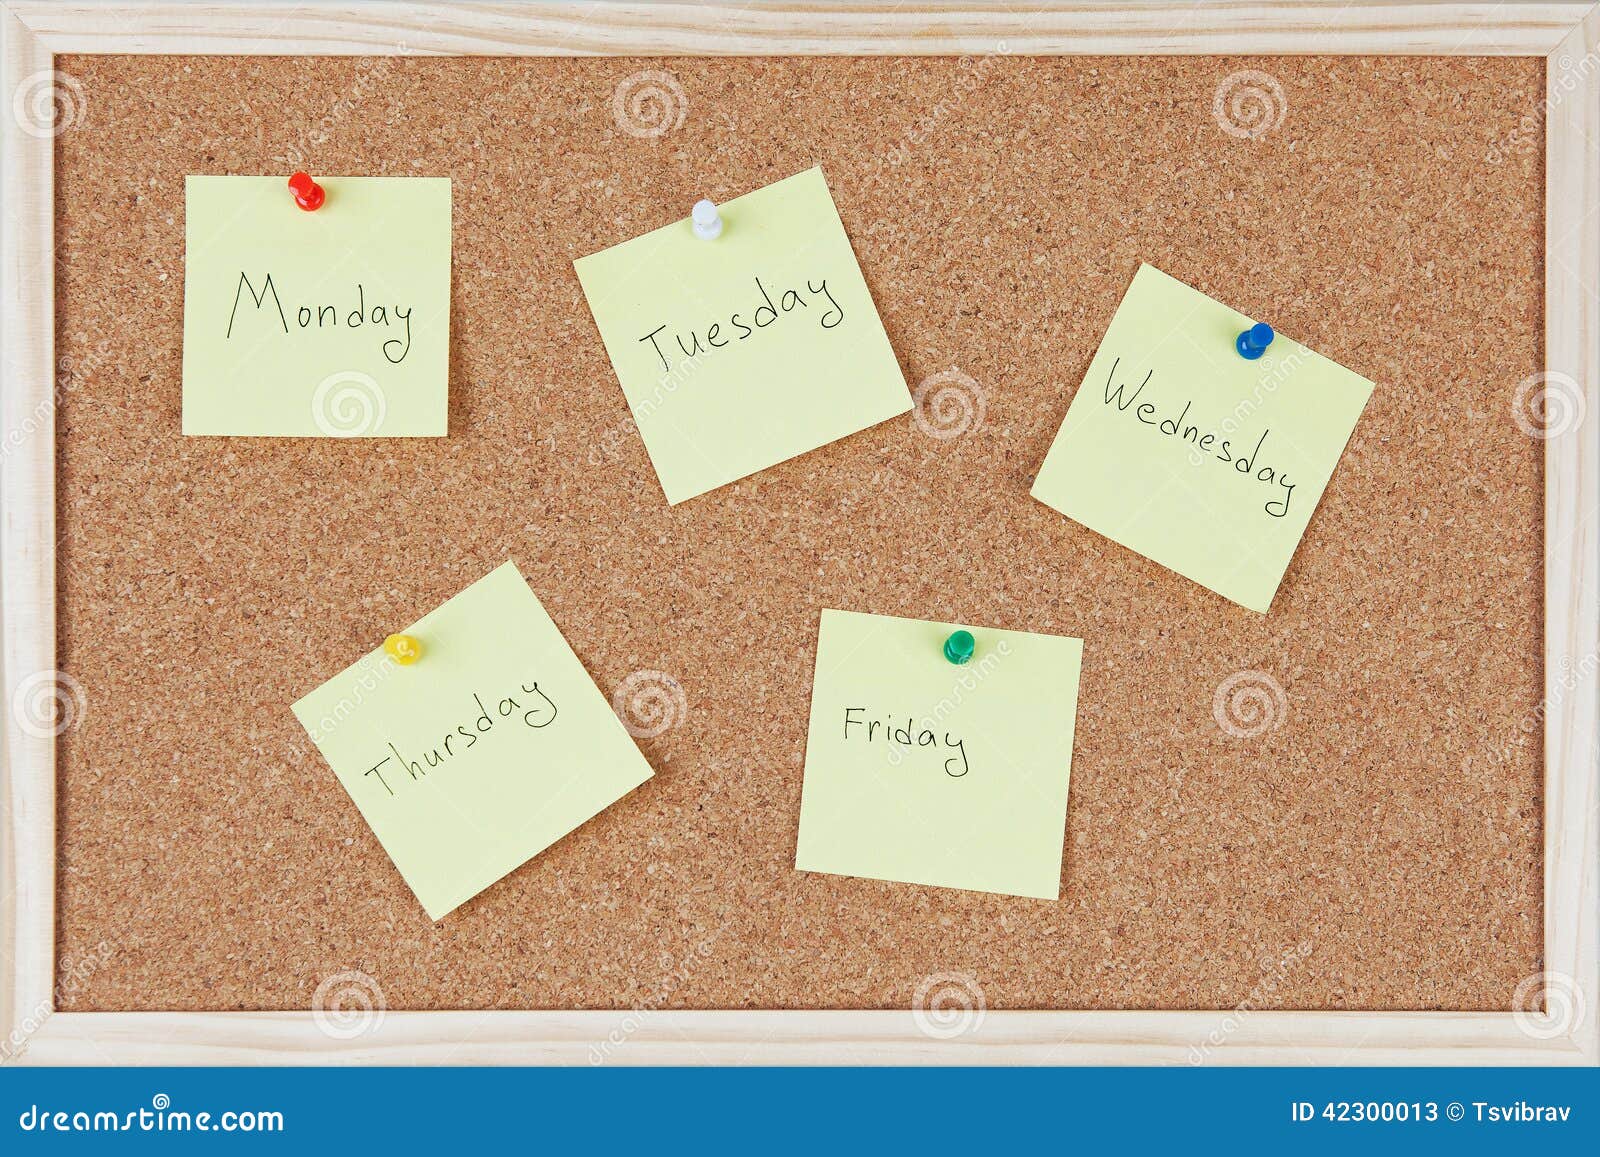 post-it notes with weekdays sticked on corkboard